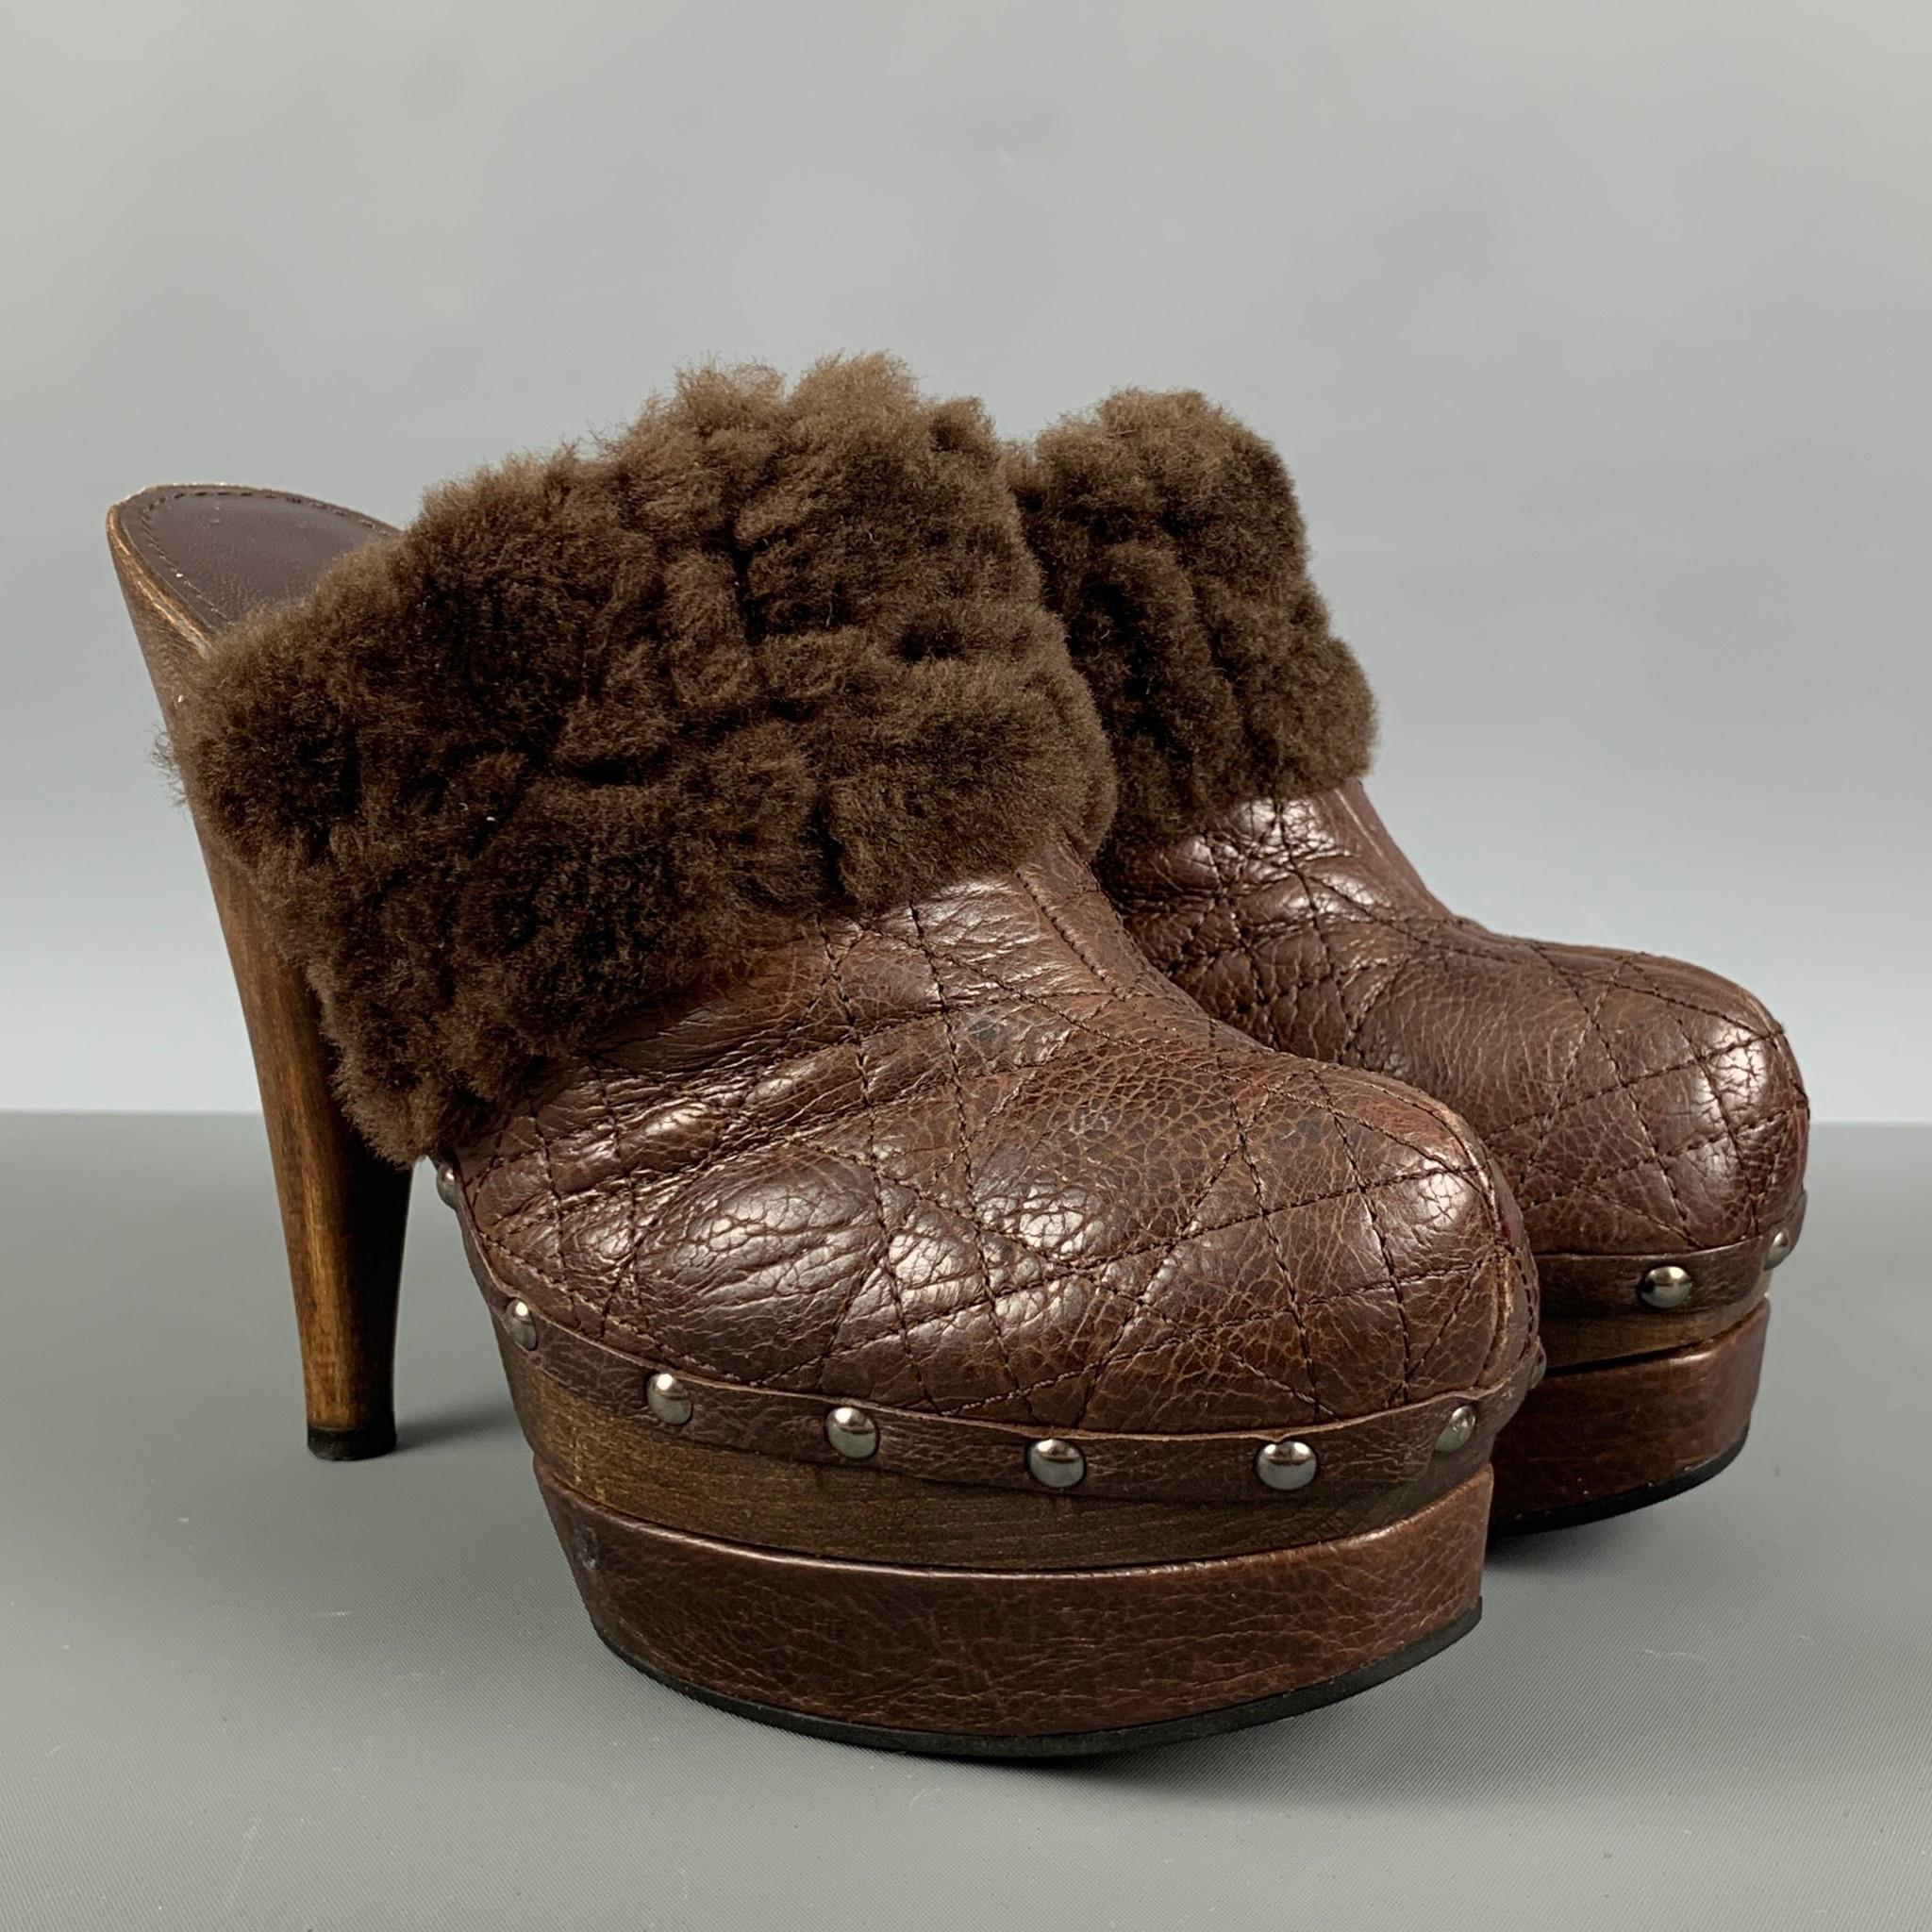 CHRISTIAN DIOR pumps comes in a brown leather featuring a quilted style, brown shearling lining, silver studded detail and platform style. Made in Italy.

Very Good Pre-Owned Condition.
Marked: 38

Measurements:

Heel: 6 in.
Platform: 1.5 in.   